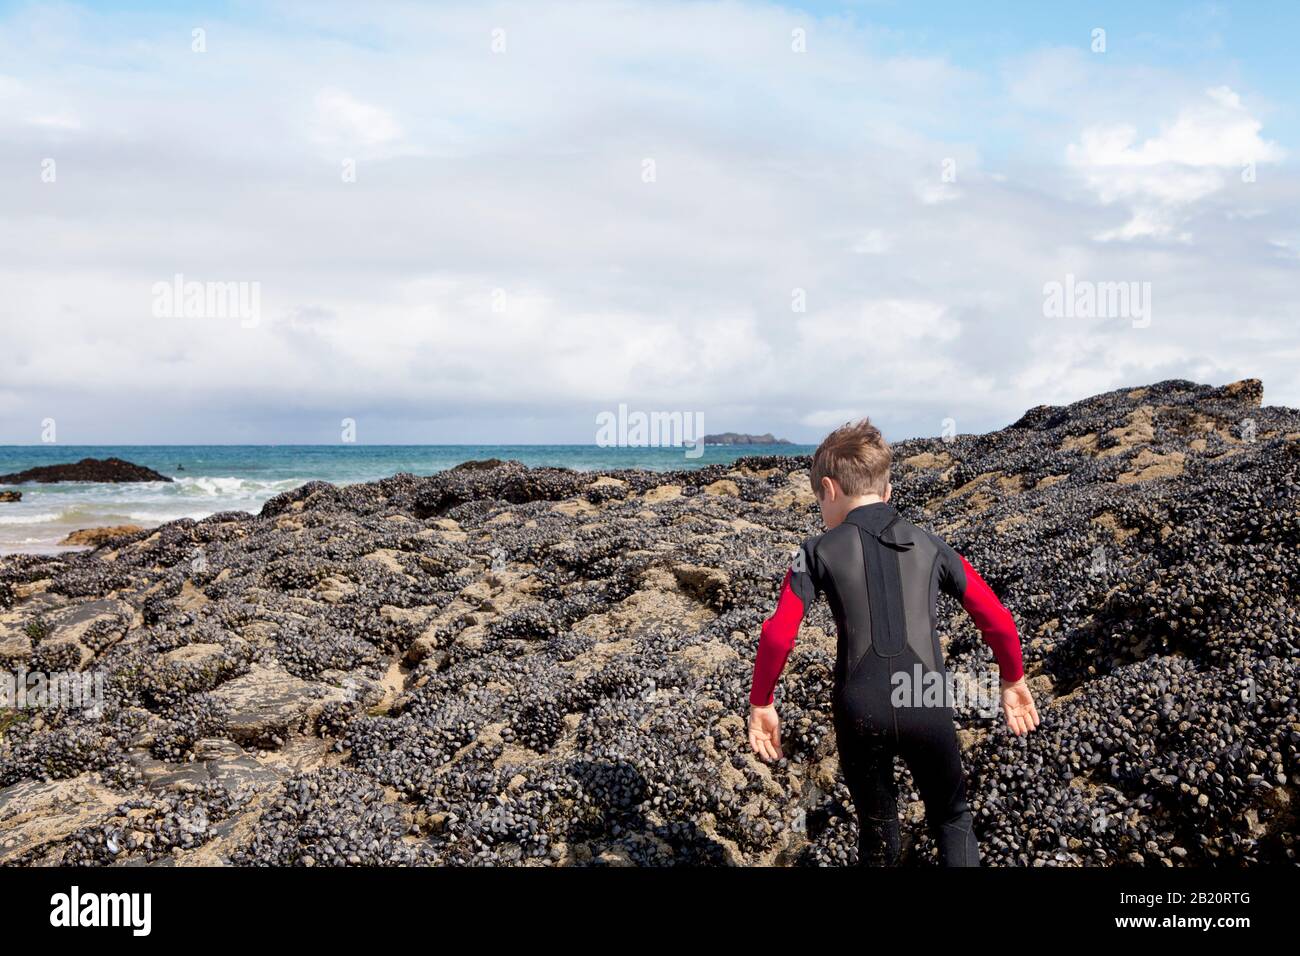 A young boy in a wetsuit climbs on a large rock exposed at low tide, covered in mussels. Harlyn Bay, North Cornwall, UK. Stock Photo